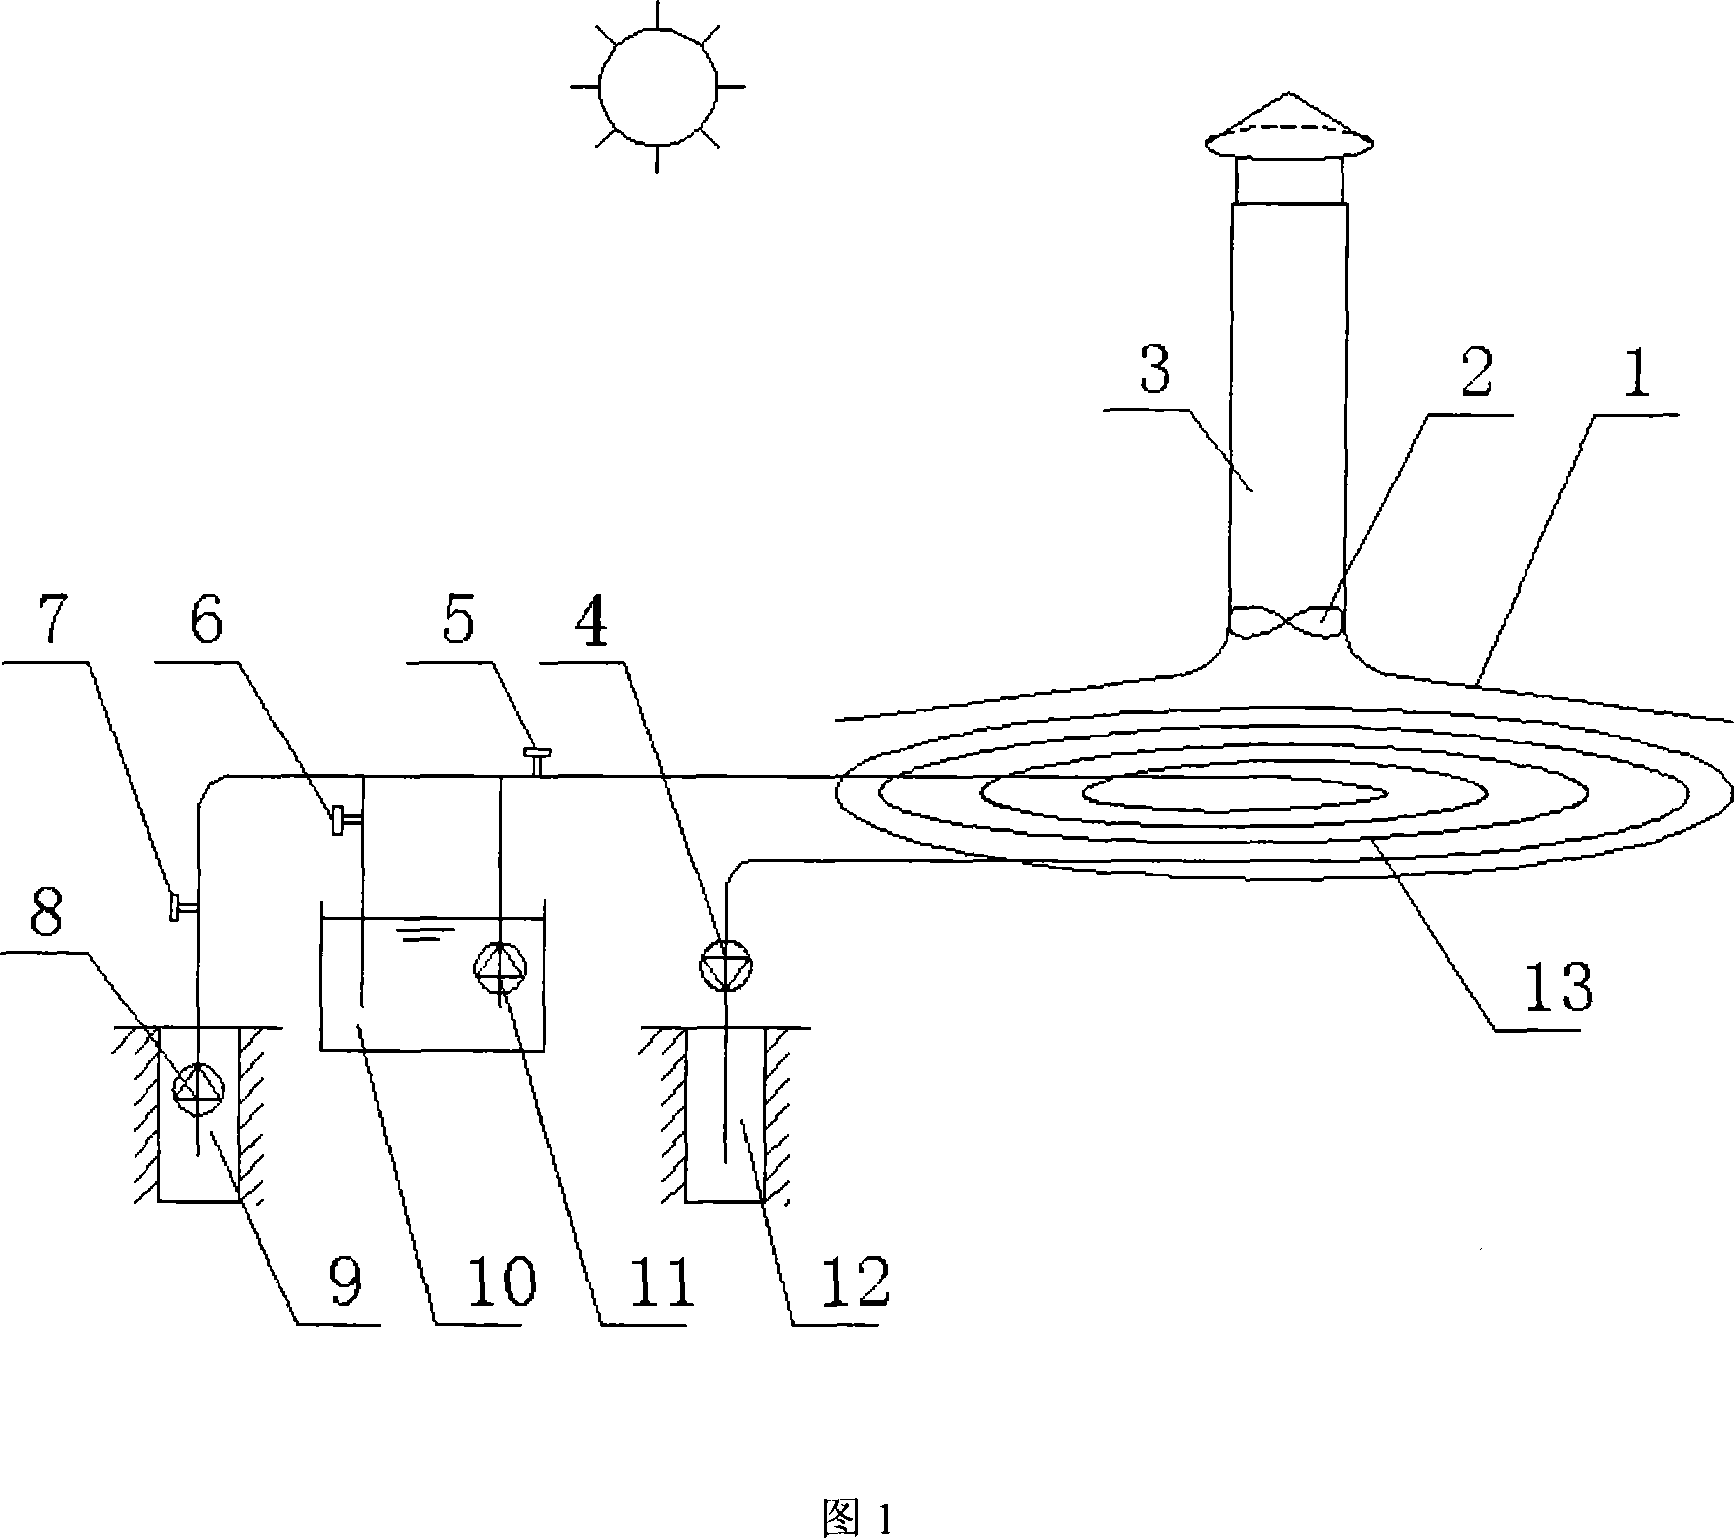 Heat energy and solar complementary thermal current power generation system